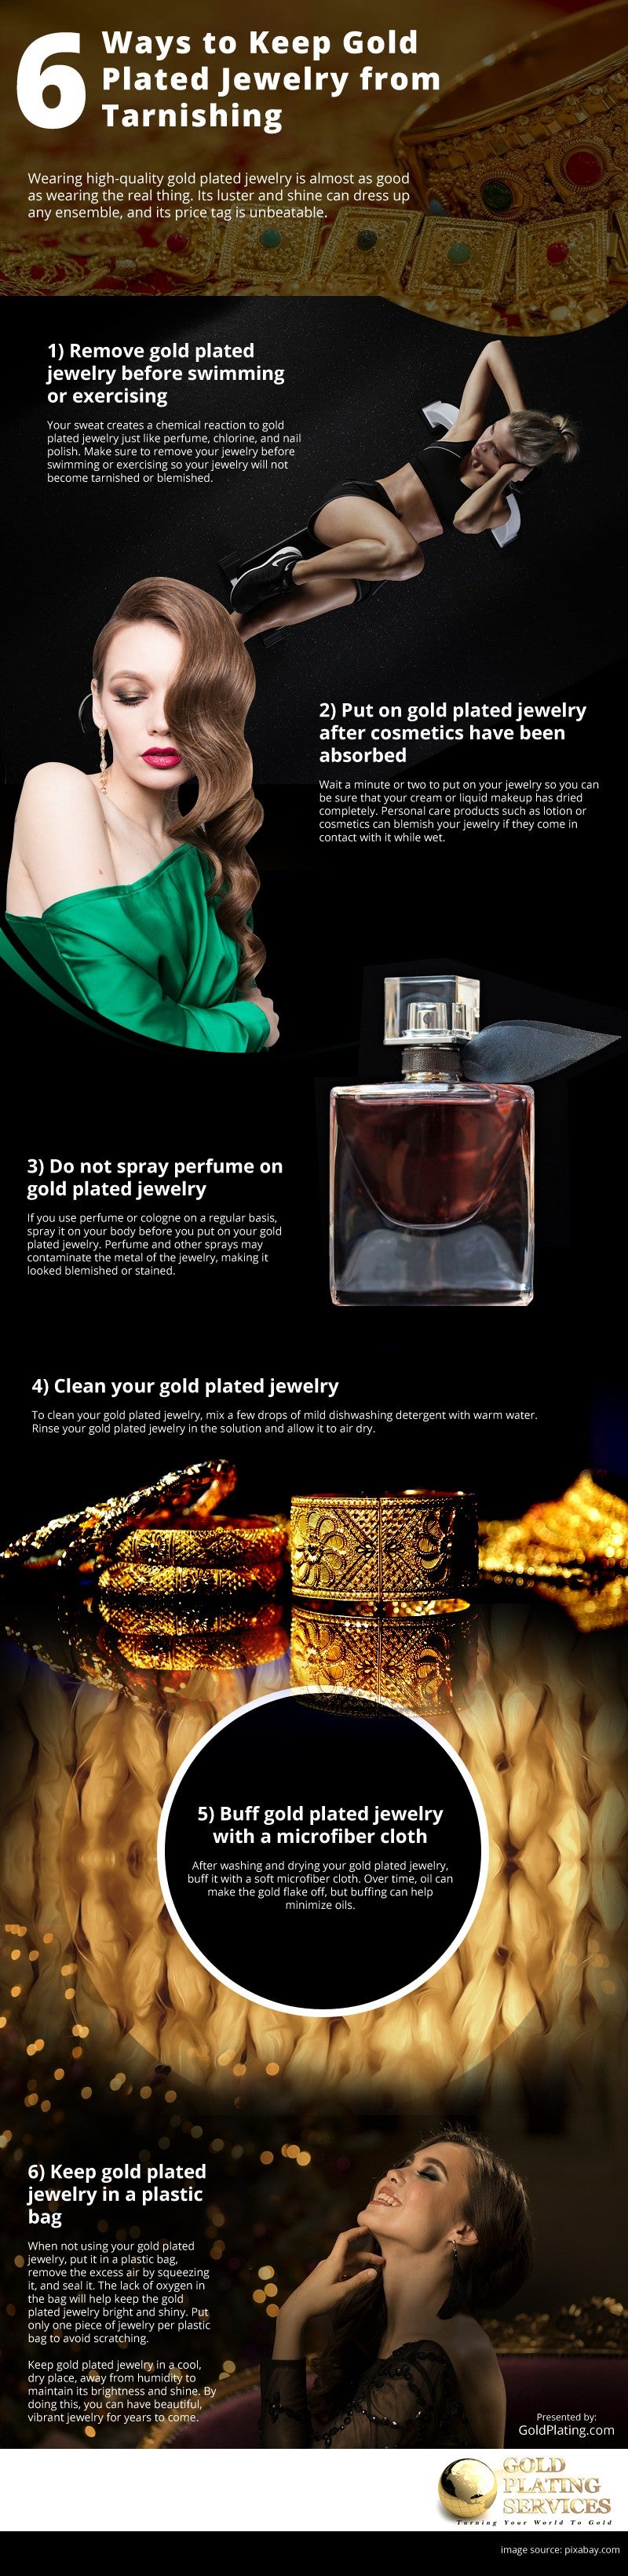 6 Ways to Keep Gold Plated Jewelry from Tarnishing [infographic]